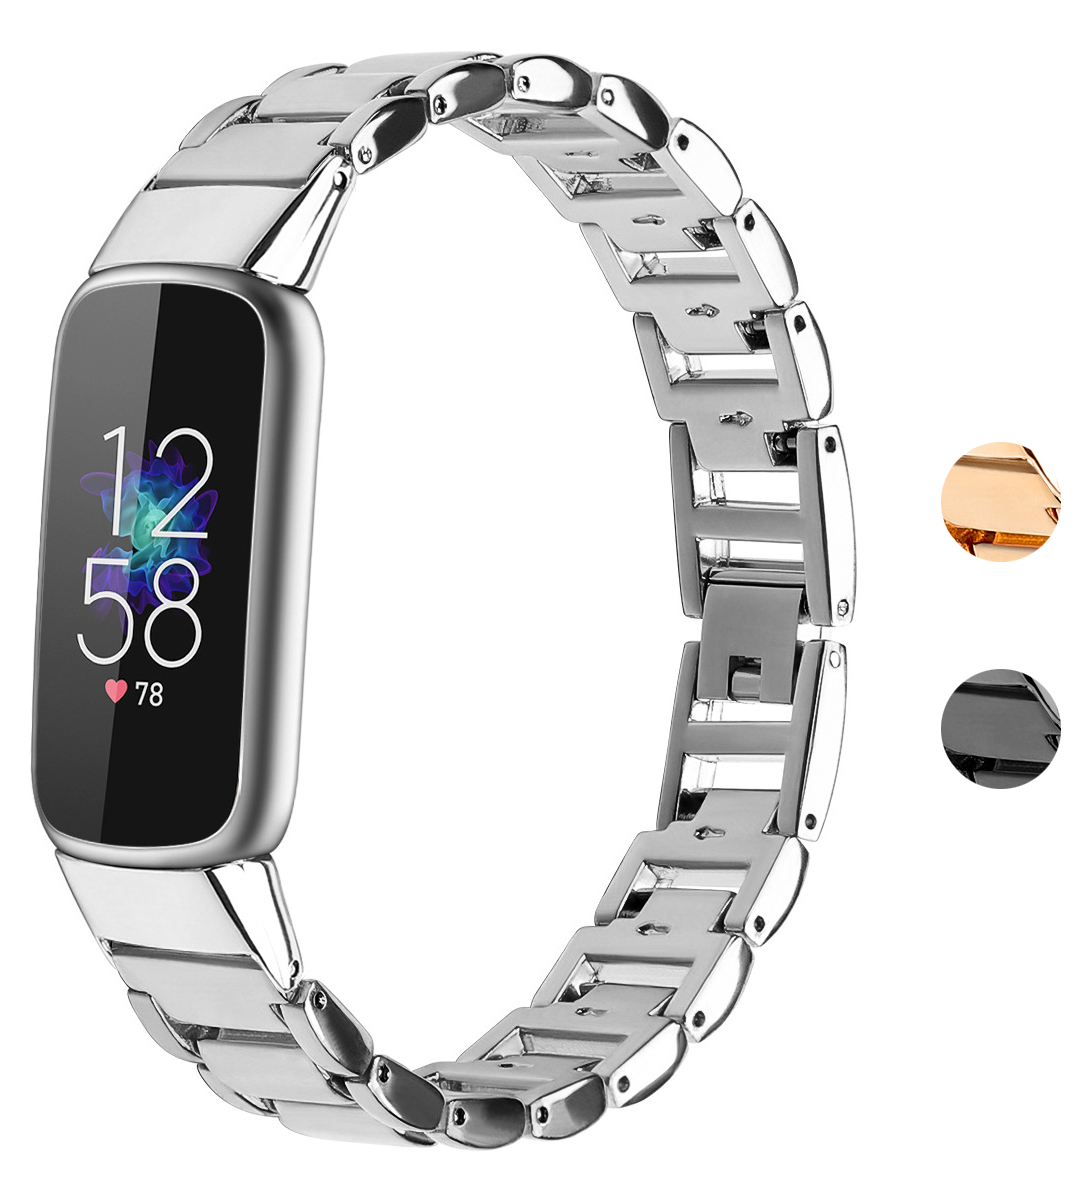 https://cdn.strapsco.com/wp-content/uploads/2022/06/fb.m158-Gallery-Silver-StrapsCo-Slim-Stainless-Steel-Band-for-Fitbit-Luxe-Metal-Watch-Strap-1.jpg